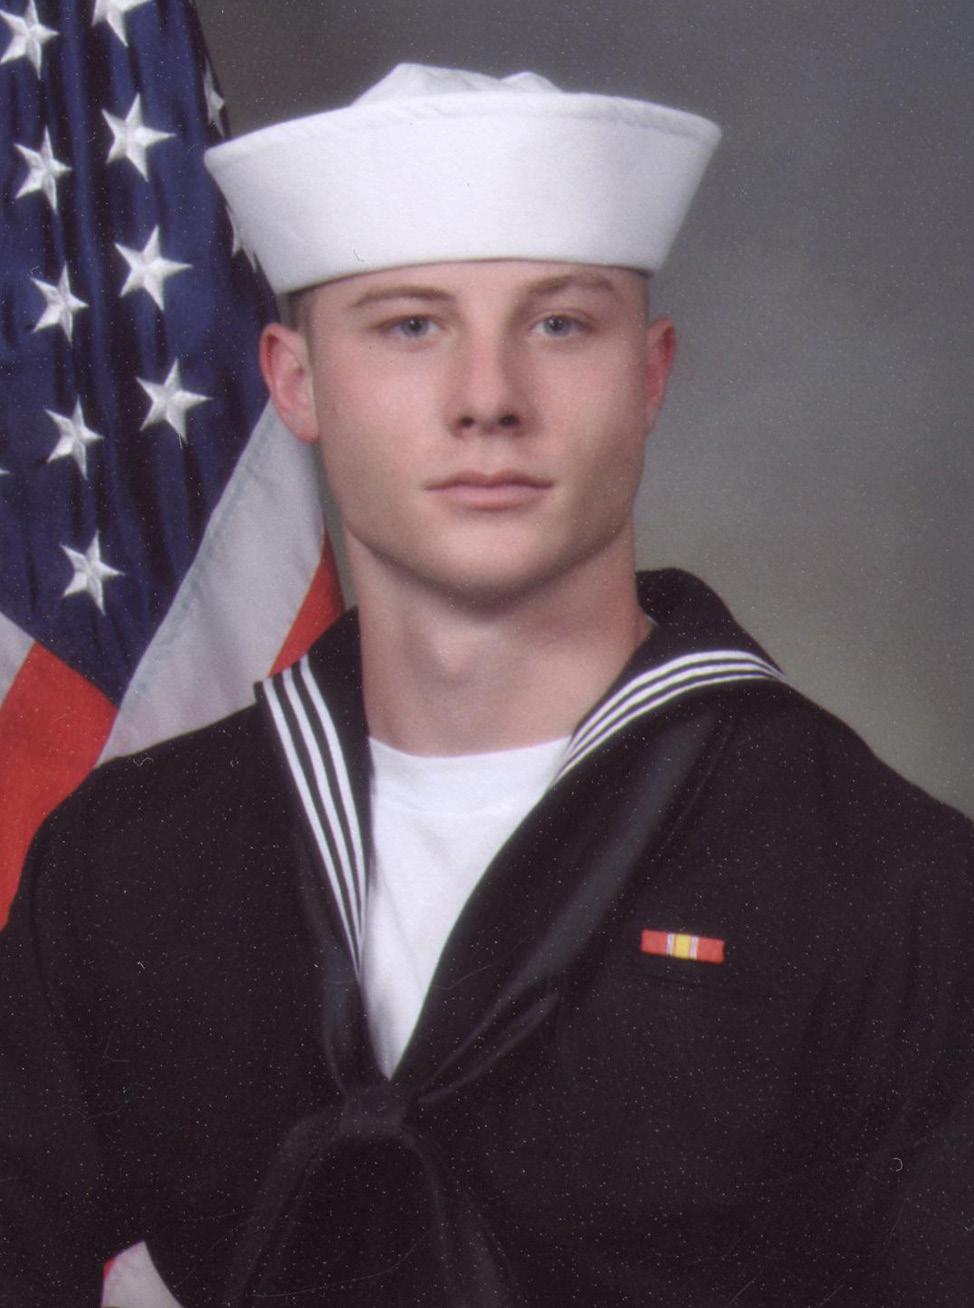 Trevor Hulsey Class of: 2012 Inducted: 2012 Branch of Service: Navy Rank: Seaman Apprectice E-2 Served: June 2012-Present War or Conflict: Iraq Military Honors,